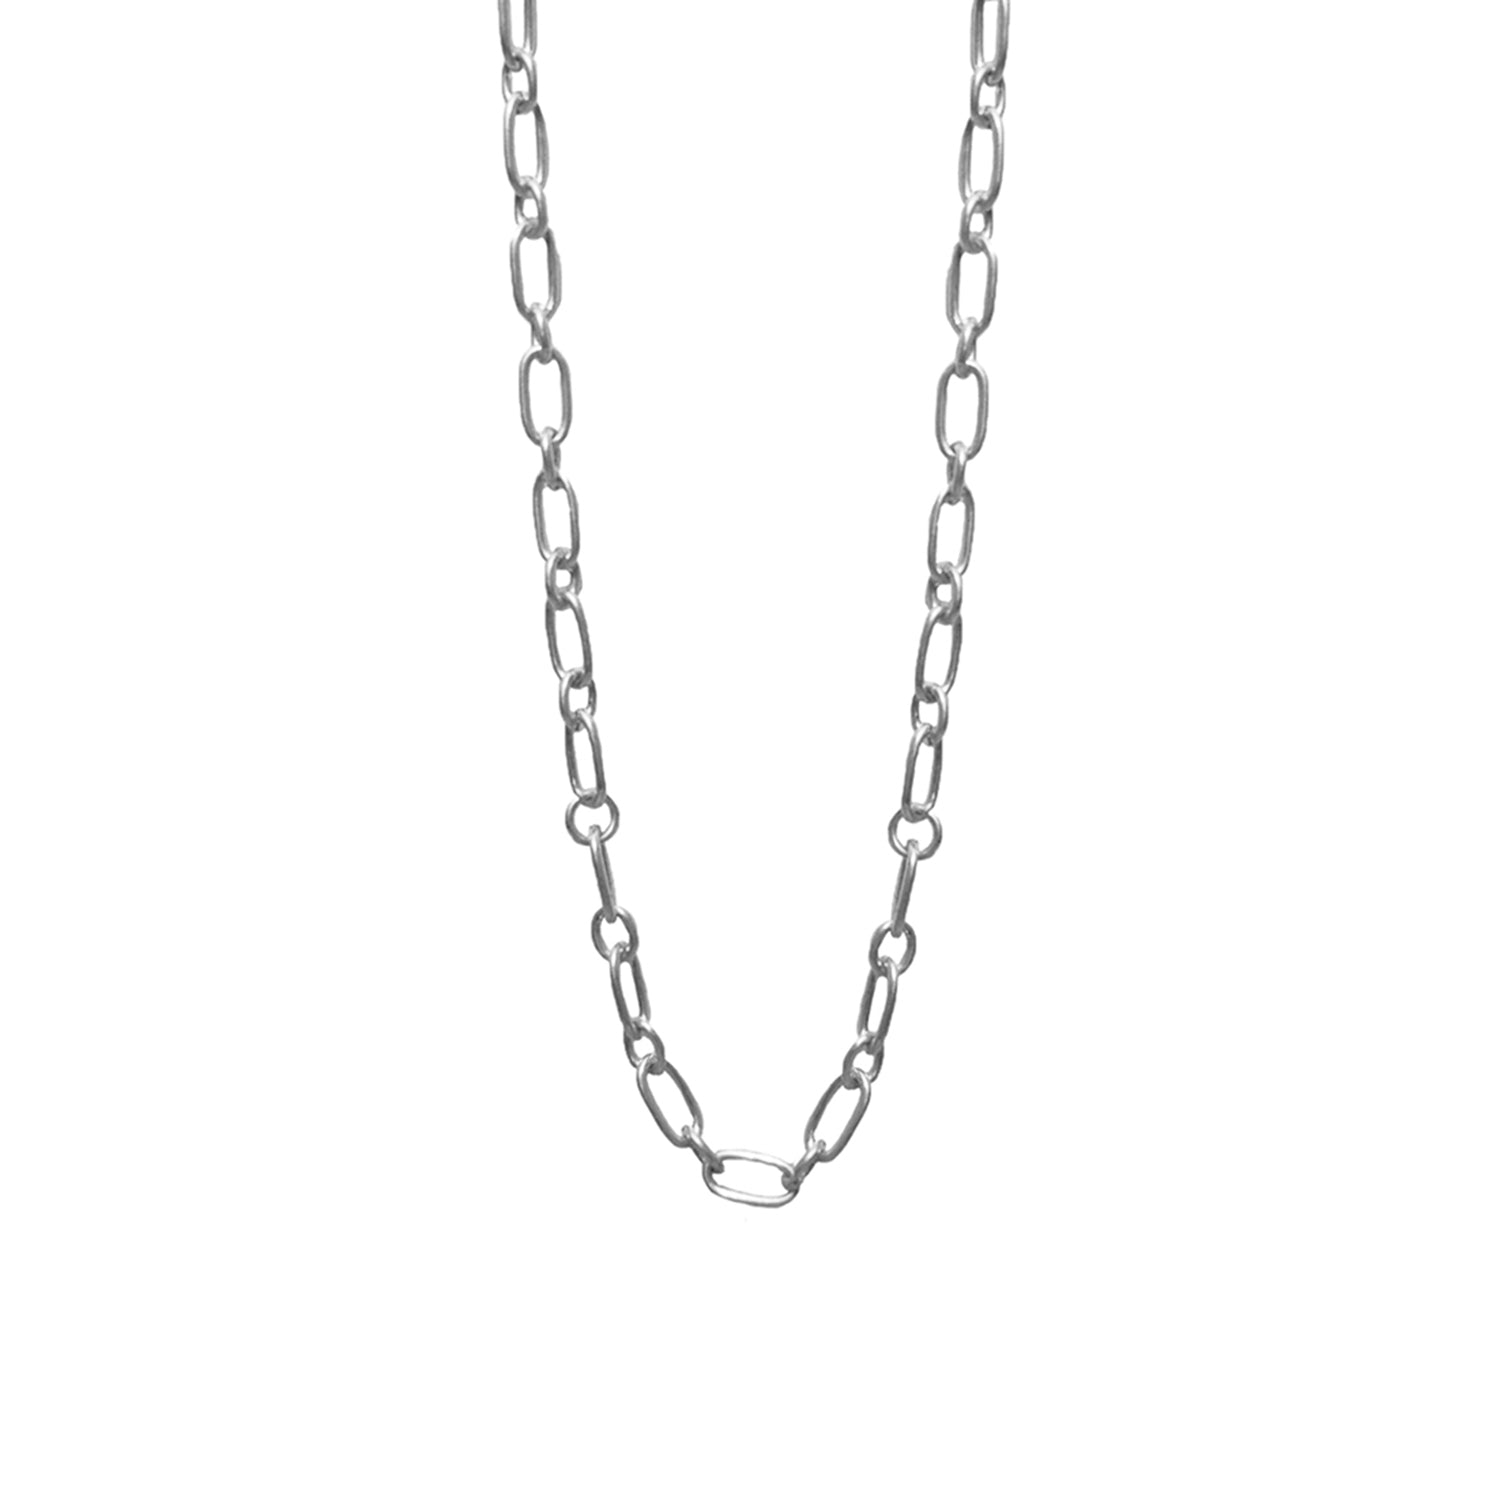 Sailor Clasp Rolo Chain Charm Holder Necklace (Sterling Silvertone) – Kirks  Folly